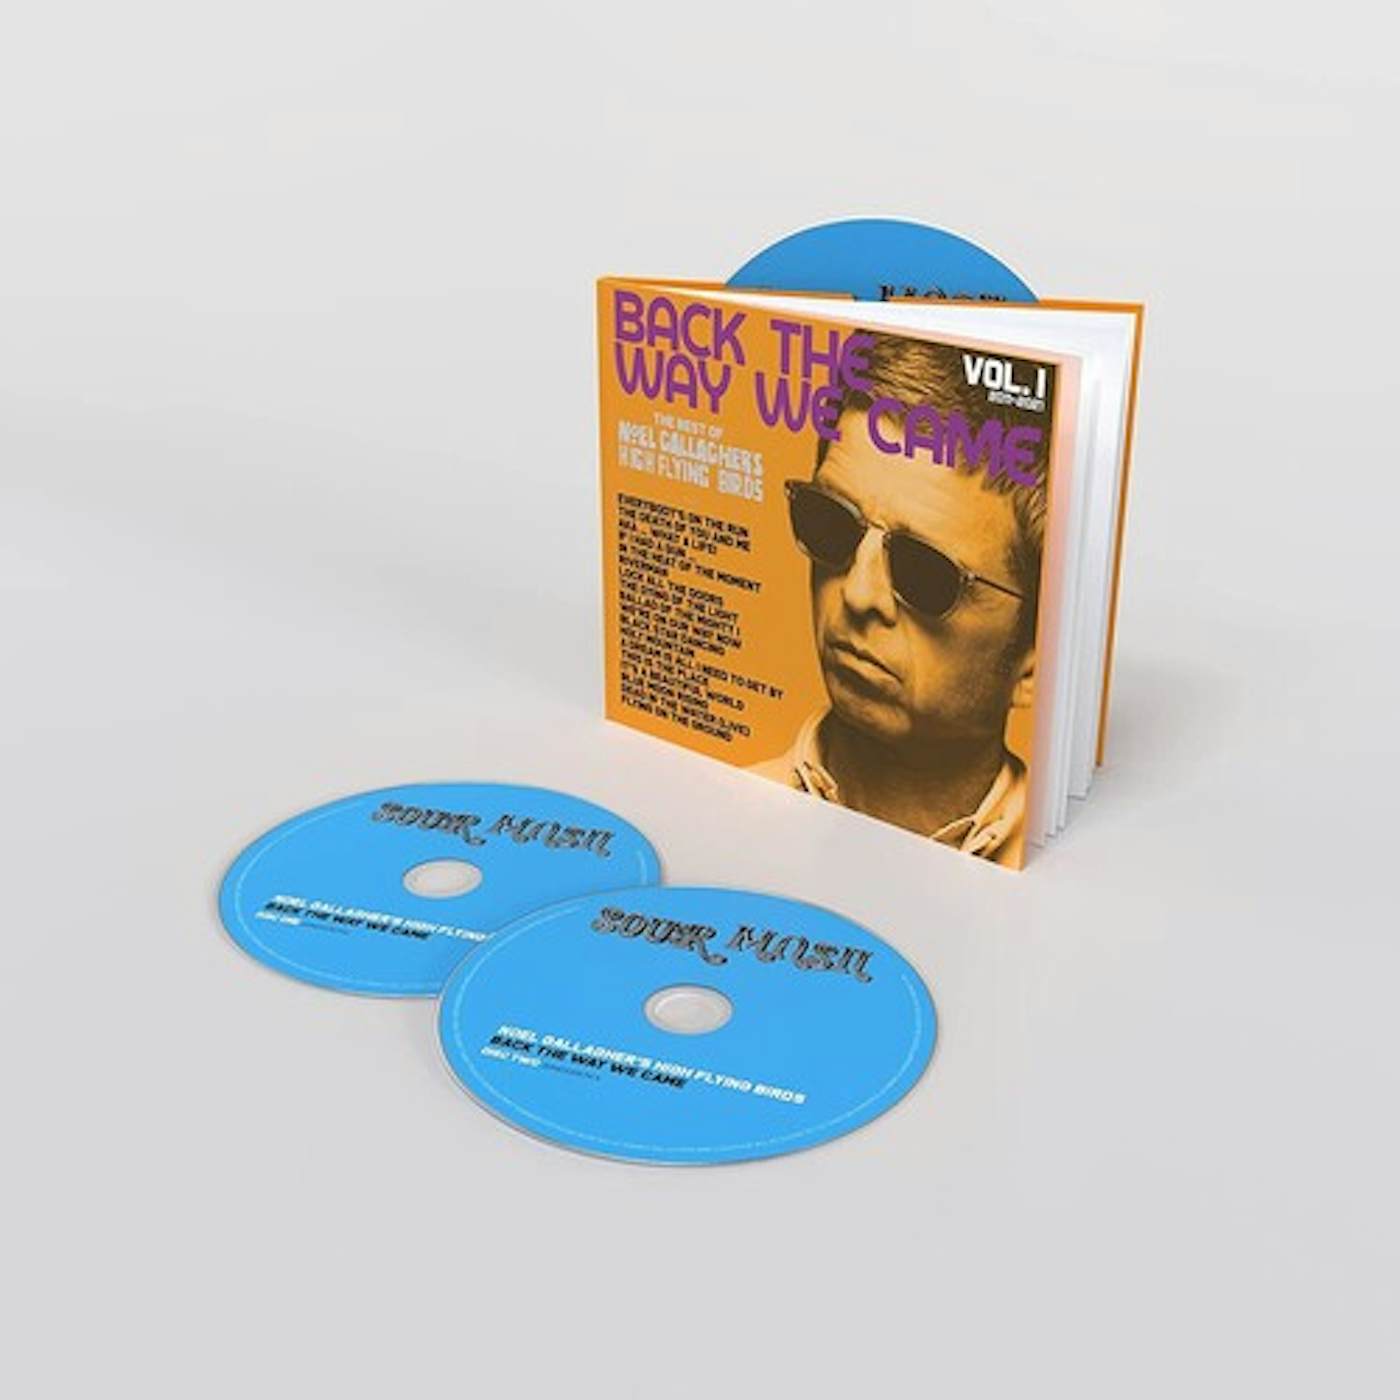 Noel Gallagher's High Flying Birds BACK THE WAY WE CAME: VOL. 1 (2011 - 2021) (DELUXE) (3CD) CD